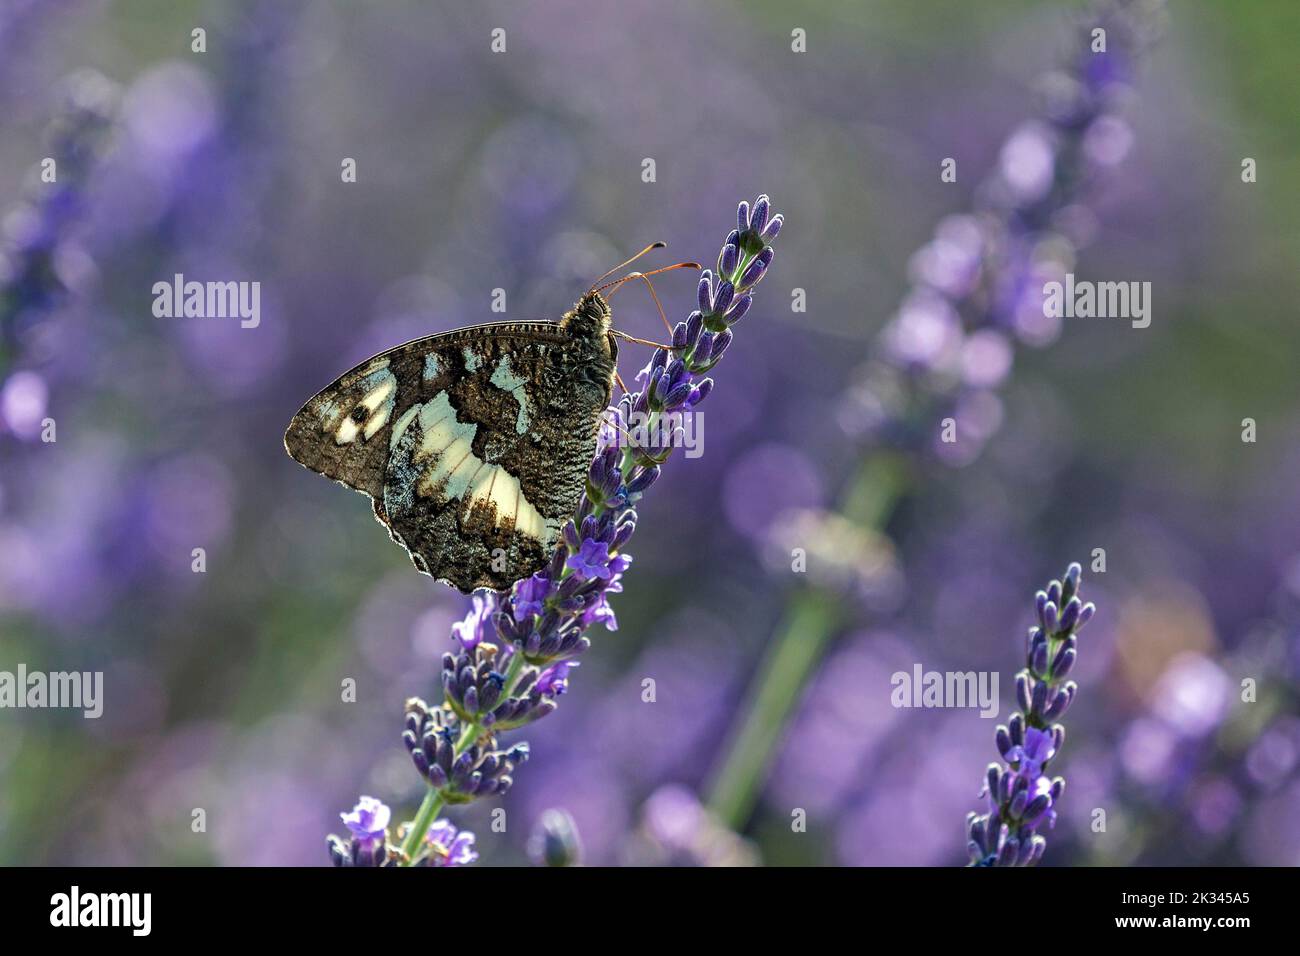 Great banded grayling (Brintesia circe), sitting on lavender flower, Provence, France Stock Photo